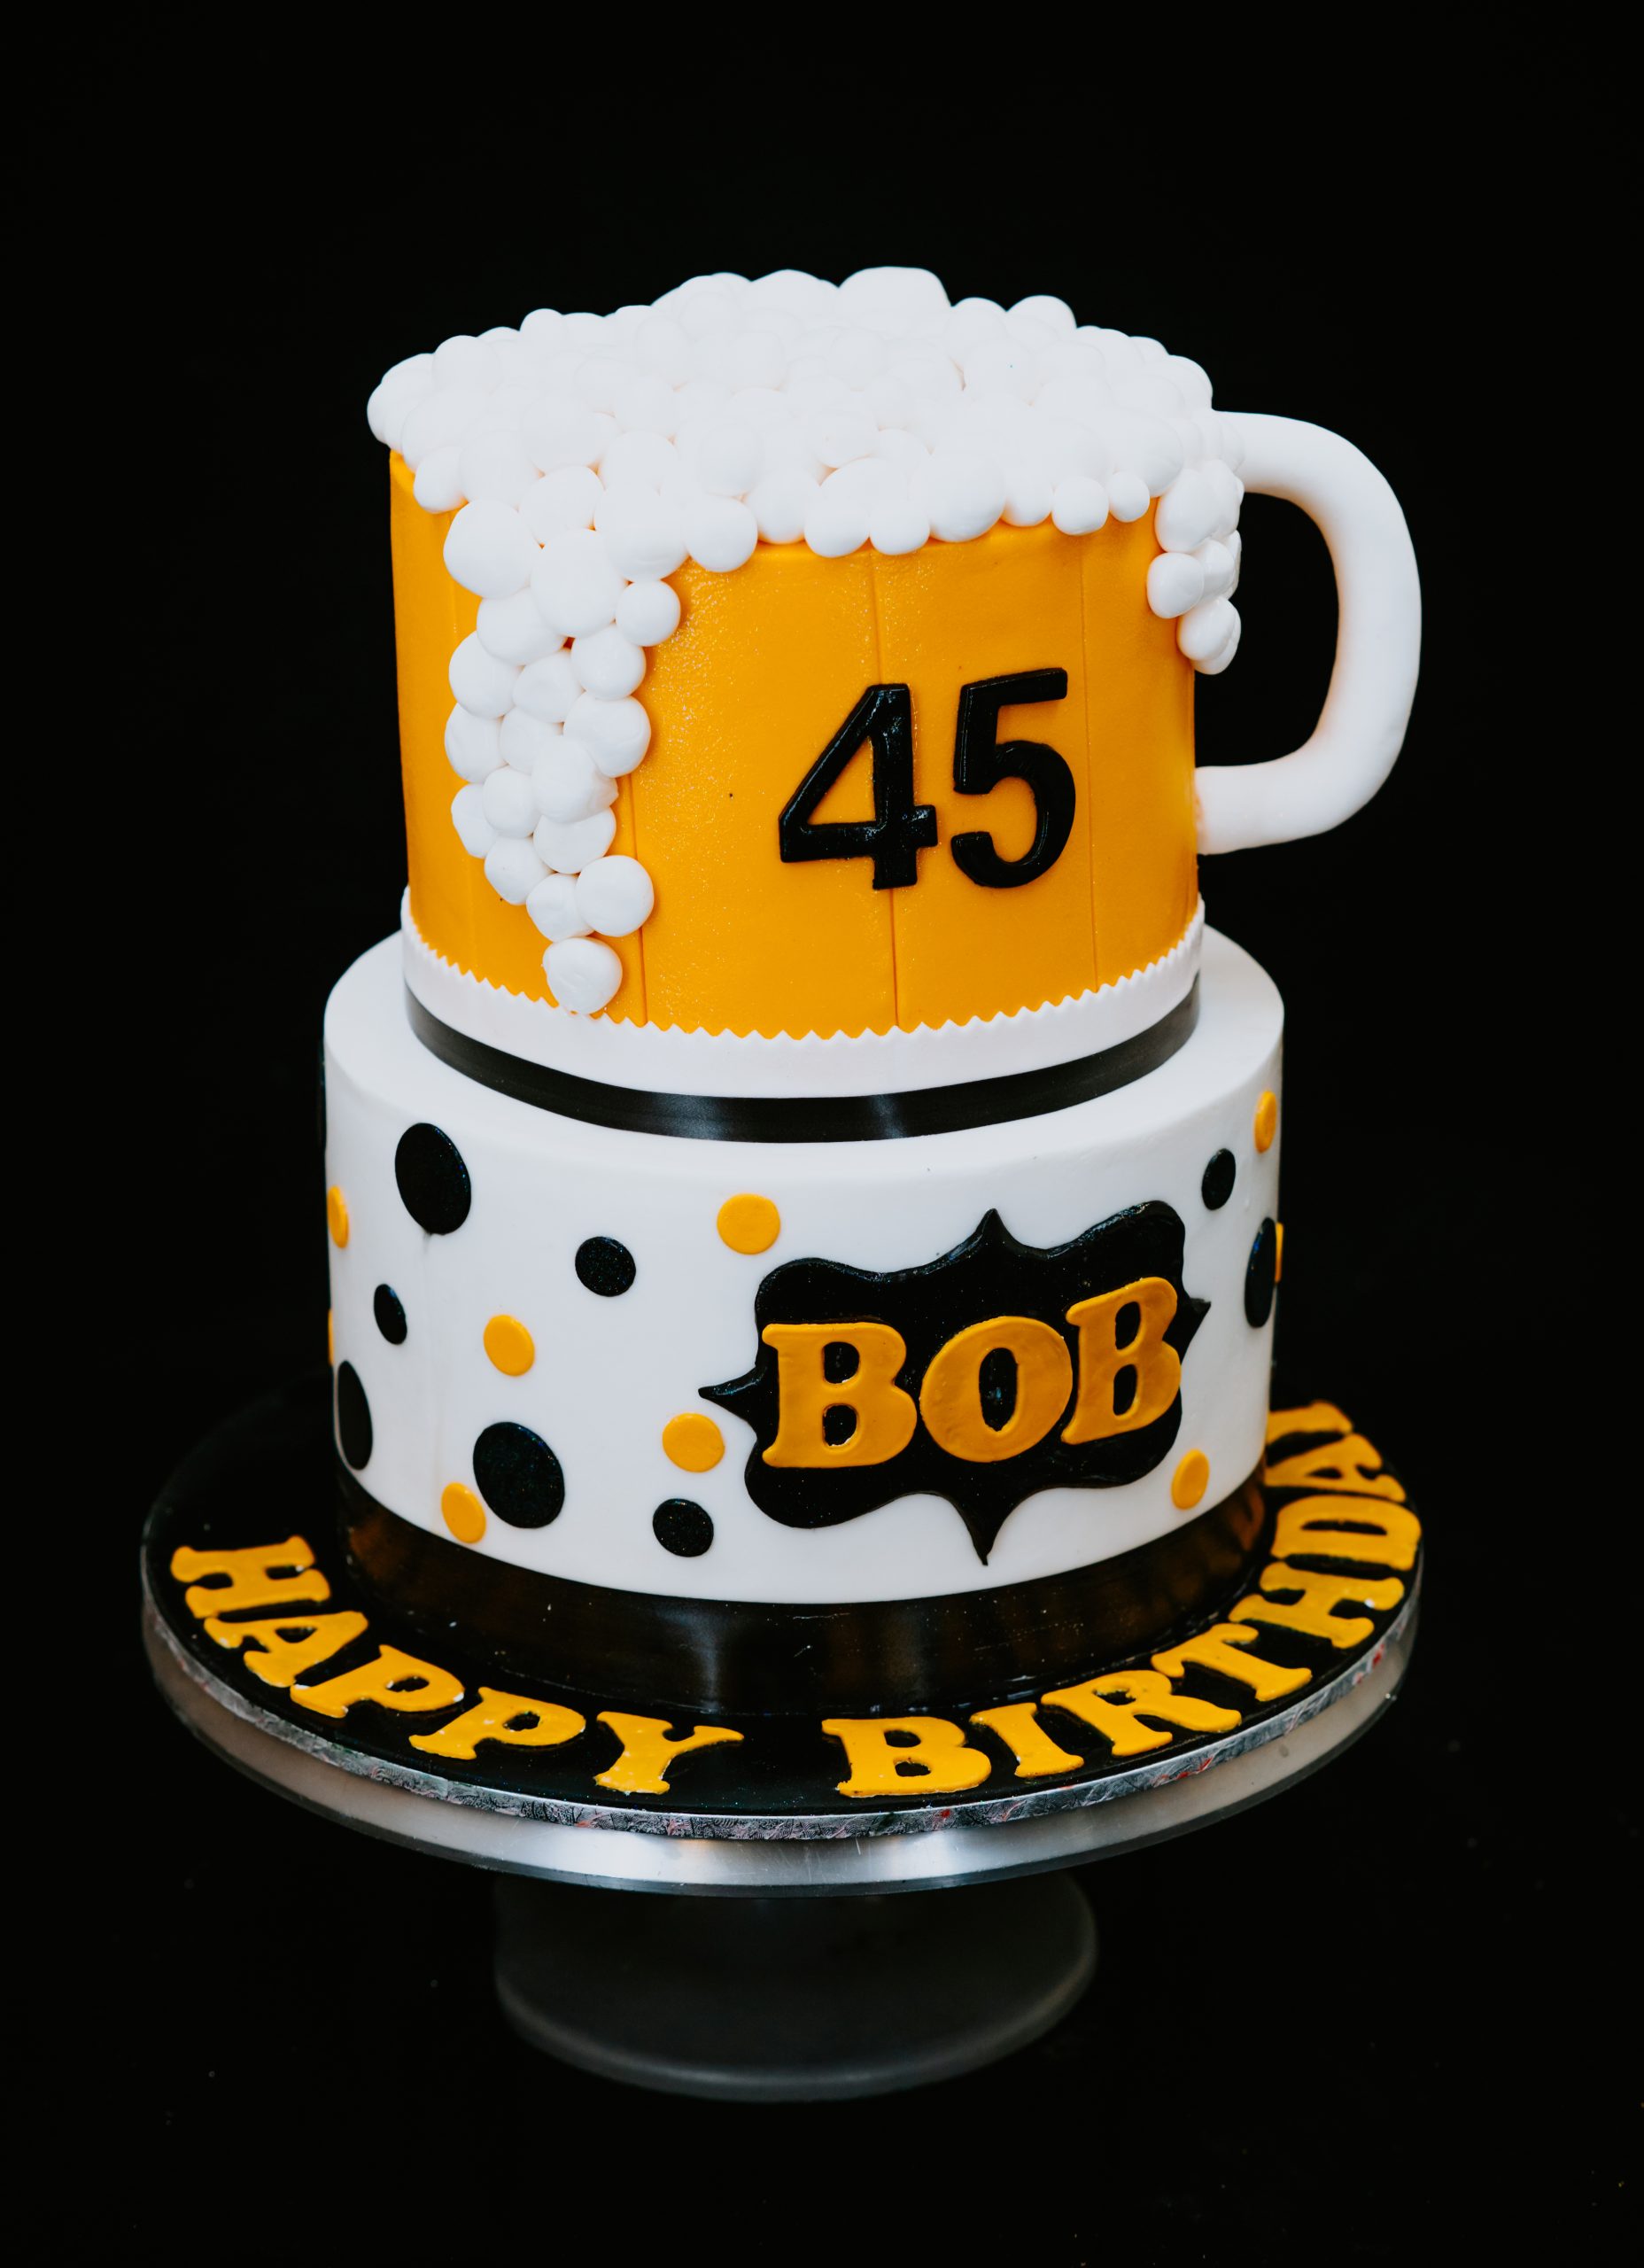 Dad's Beer Cake, A Customize Beer cake